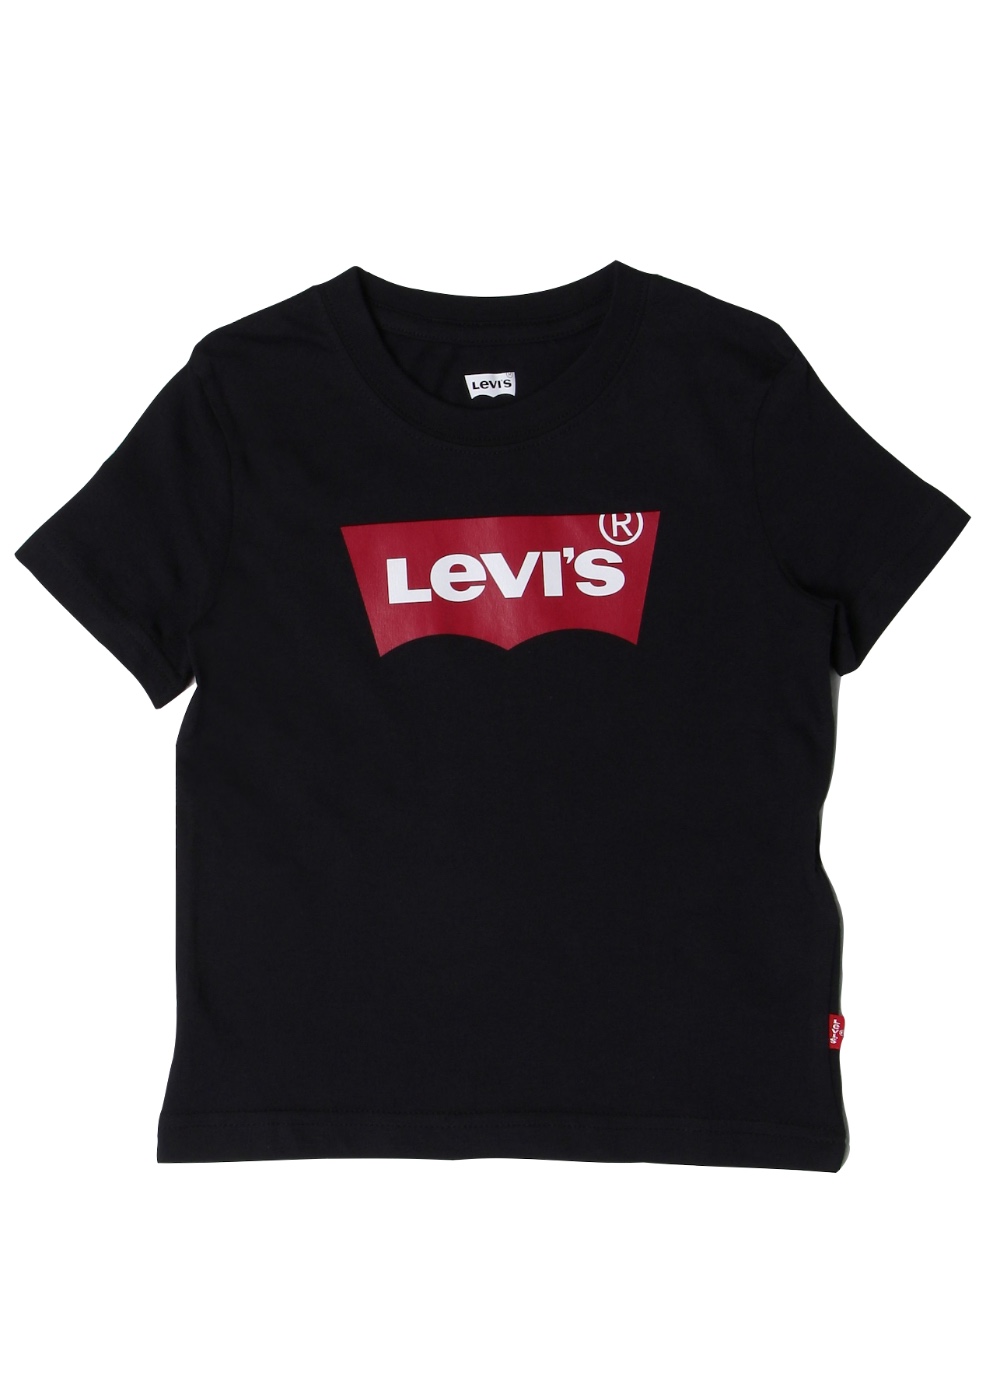 Featured image for “LEVI'S T-SHIRT COTONE”